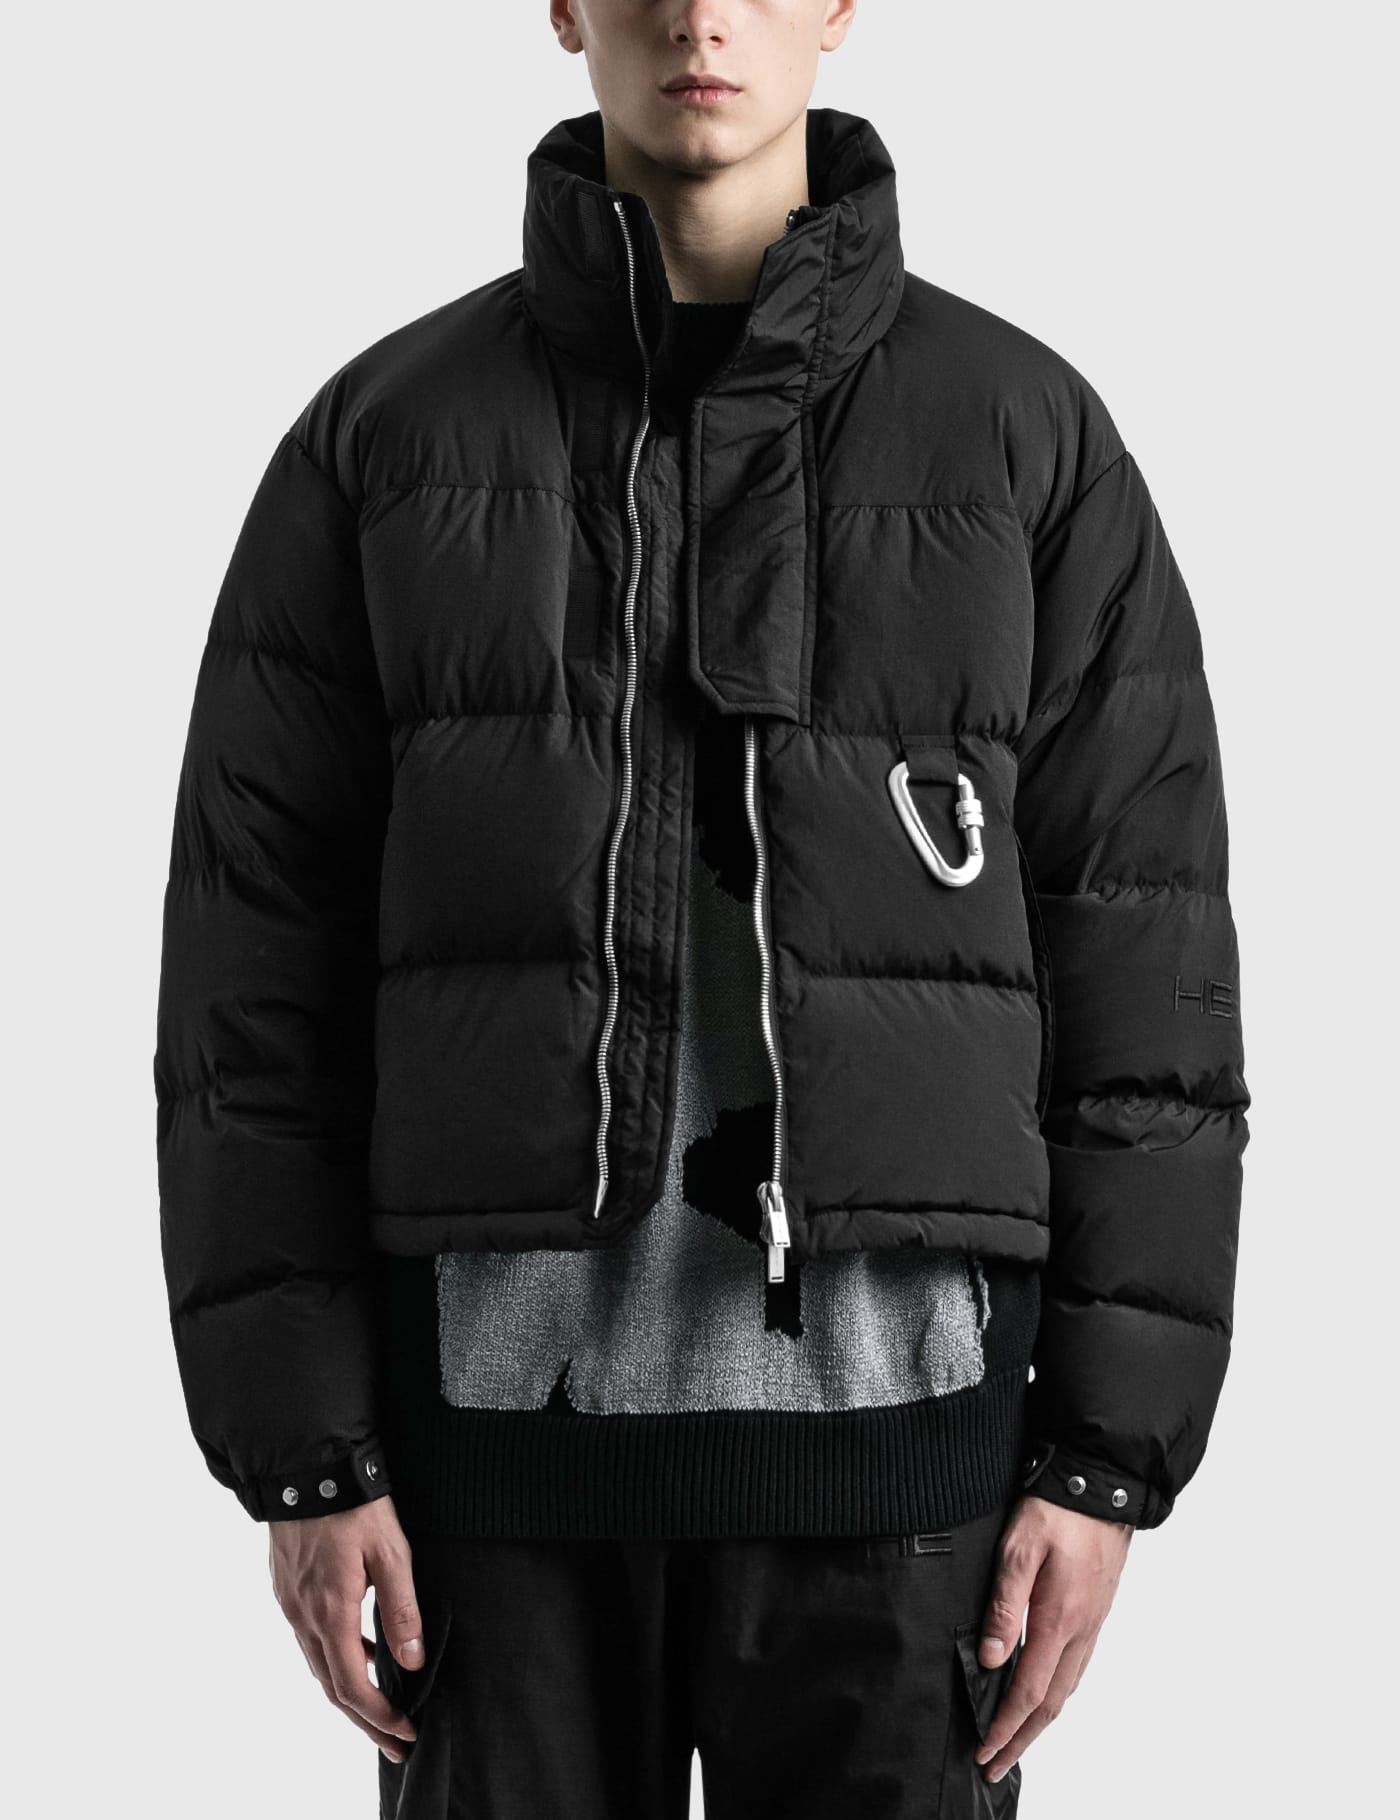 Heliot Emil - Carabiner Down Jacket | HBX - Globally Curated